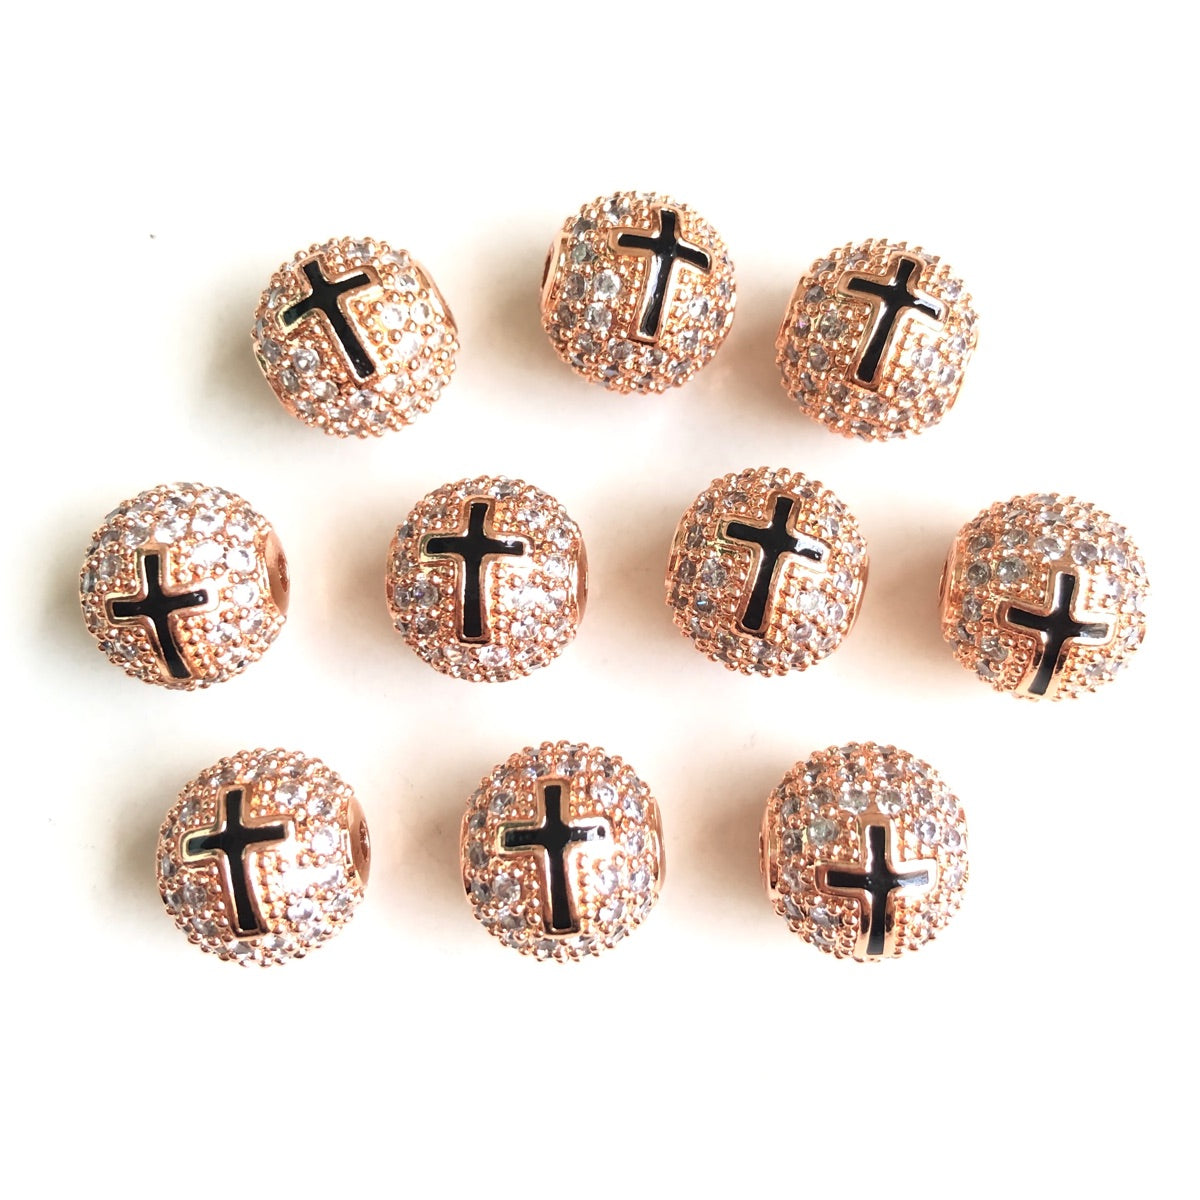 10-20pcs/lot 10mm CZ Paved Cross Ball Spacers Beads Rose Gold CZ Paved Spacers 10mm Beads Ball Beads New Spacers Arrivals Charms Beads Beyond